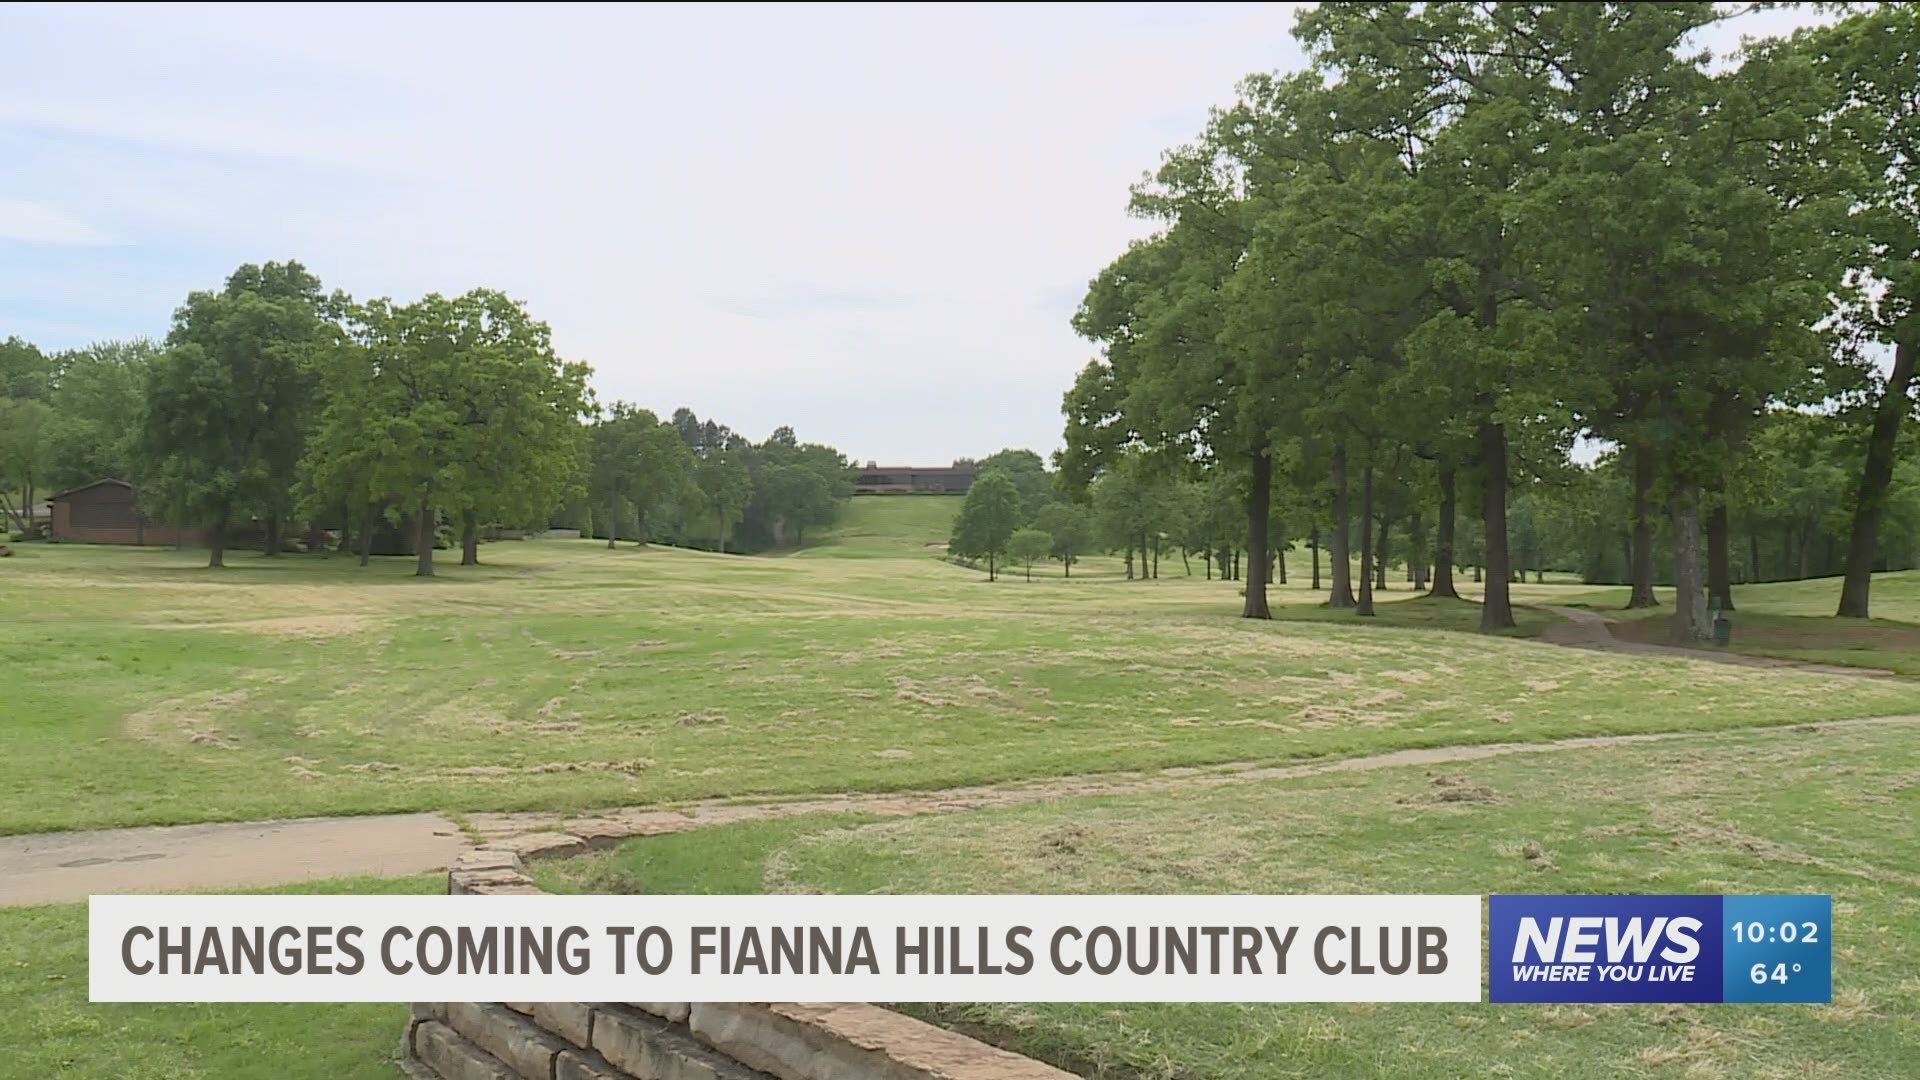 The Fort Smith Board of Directors has decided to go forward with plans to replat portions of the former Fianna Hills Golf Club property.